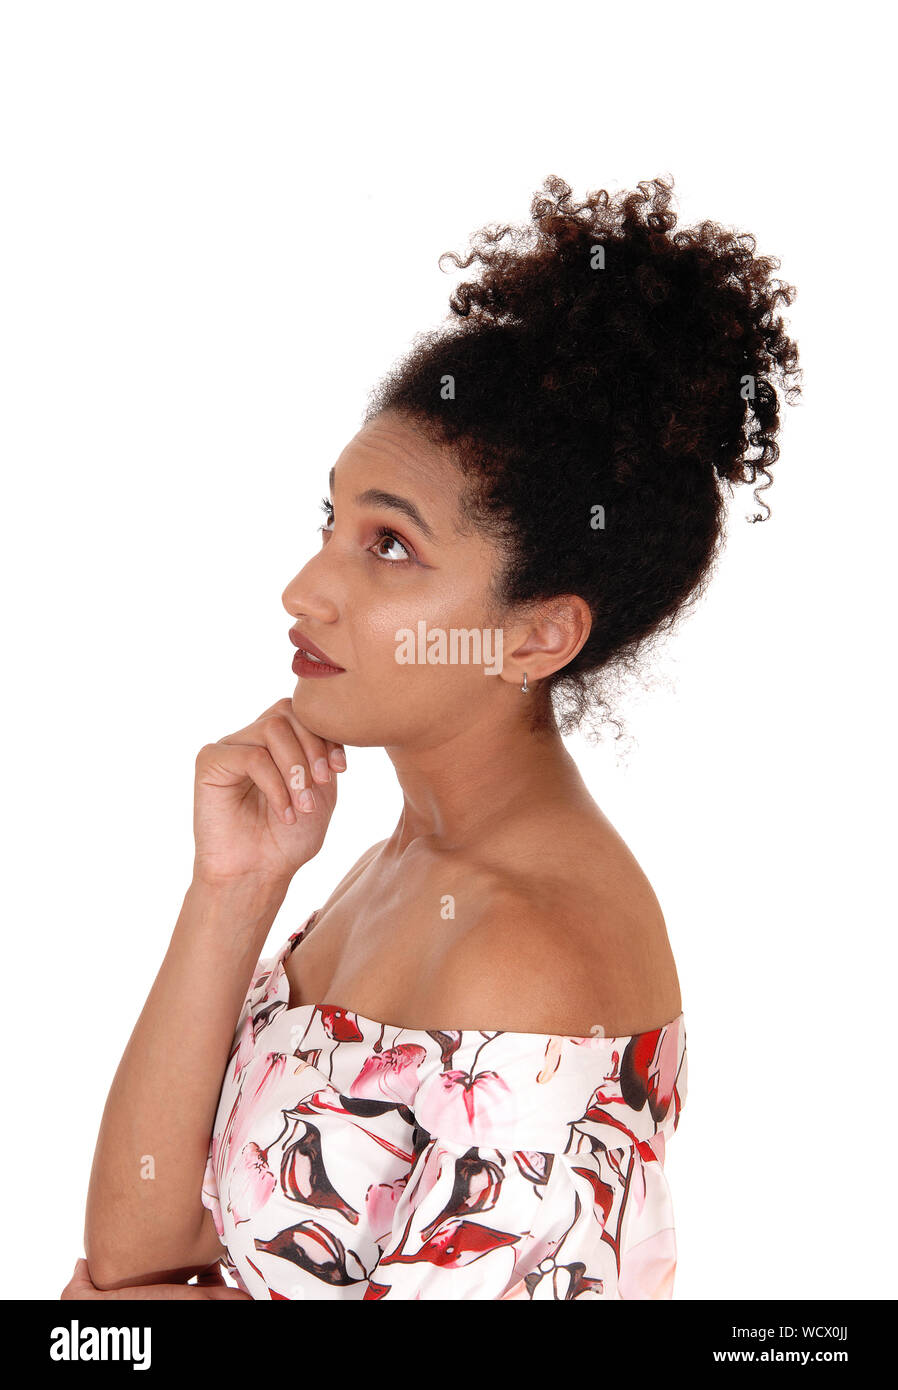 A close up image of a multi-racial woman standing in profile in a summer dress holding her hand on her chin with a slim figure and curly black hair, i Stock Photo